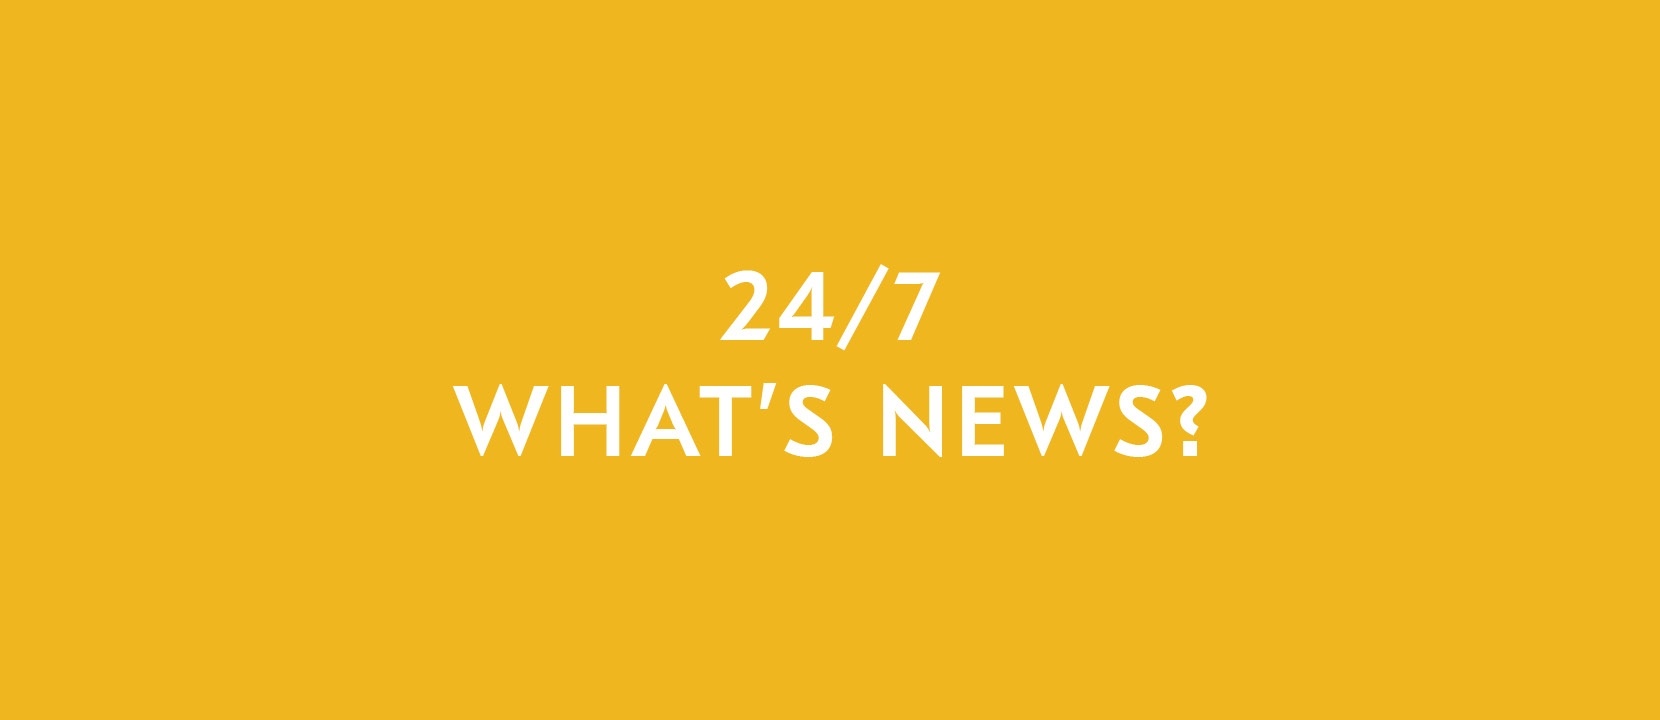 24/7 What's news?